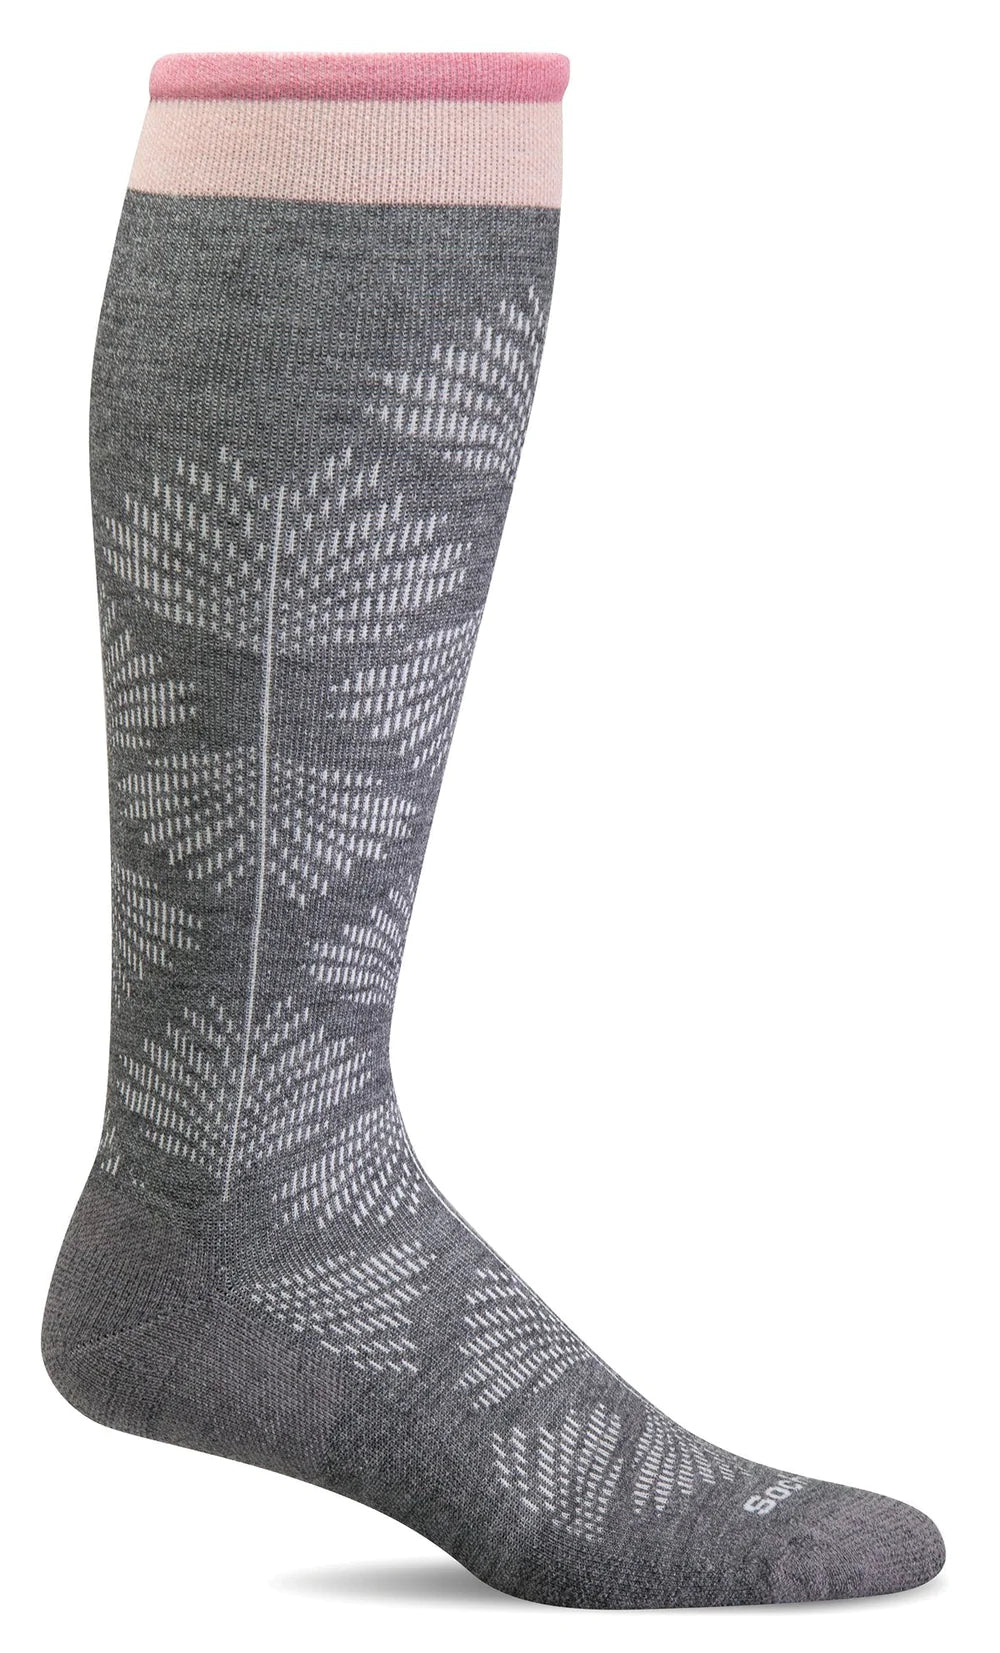 Sockwell Full Floral Moderate Graduated Compression Socks | Wide Calf Fit (Women's)